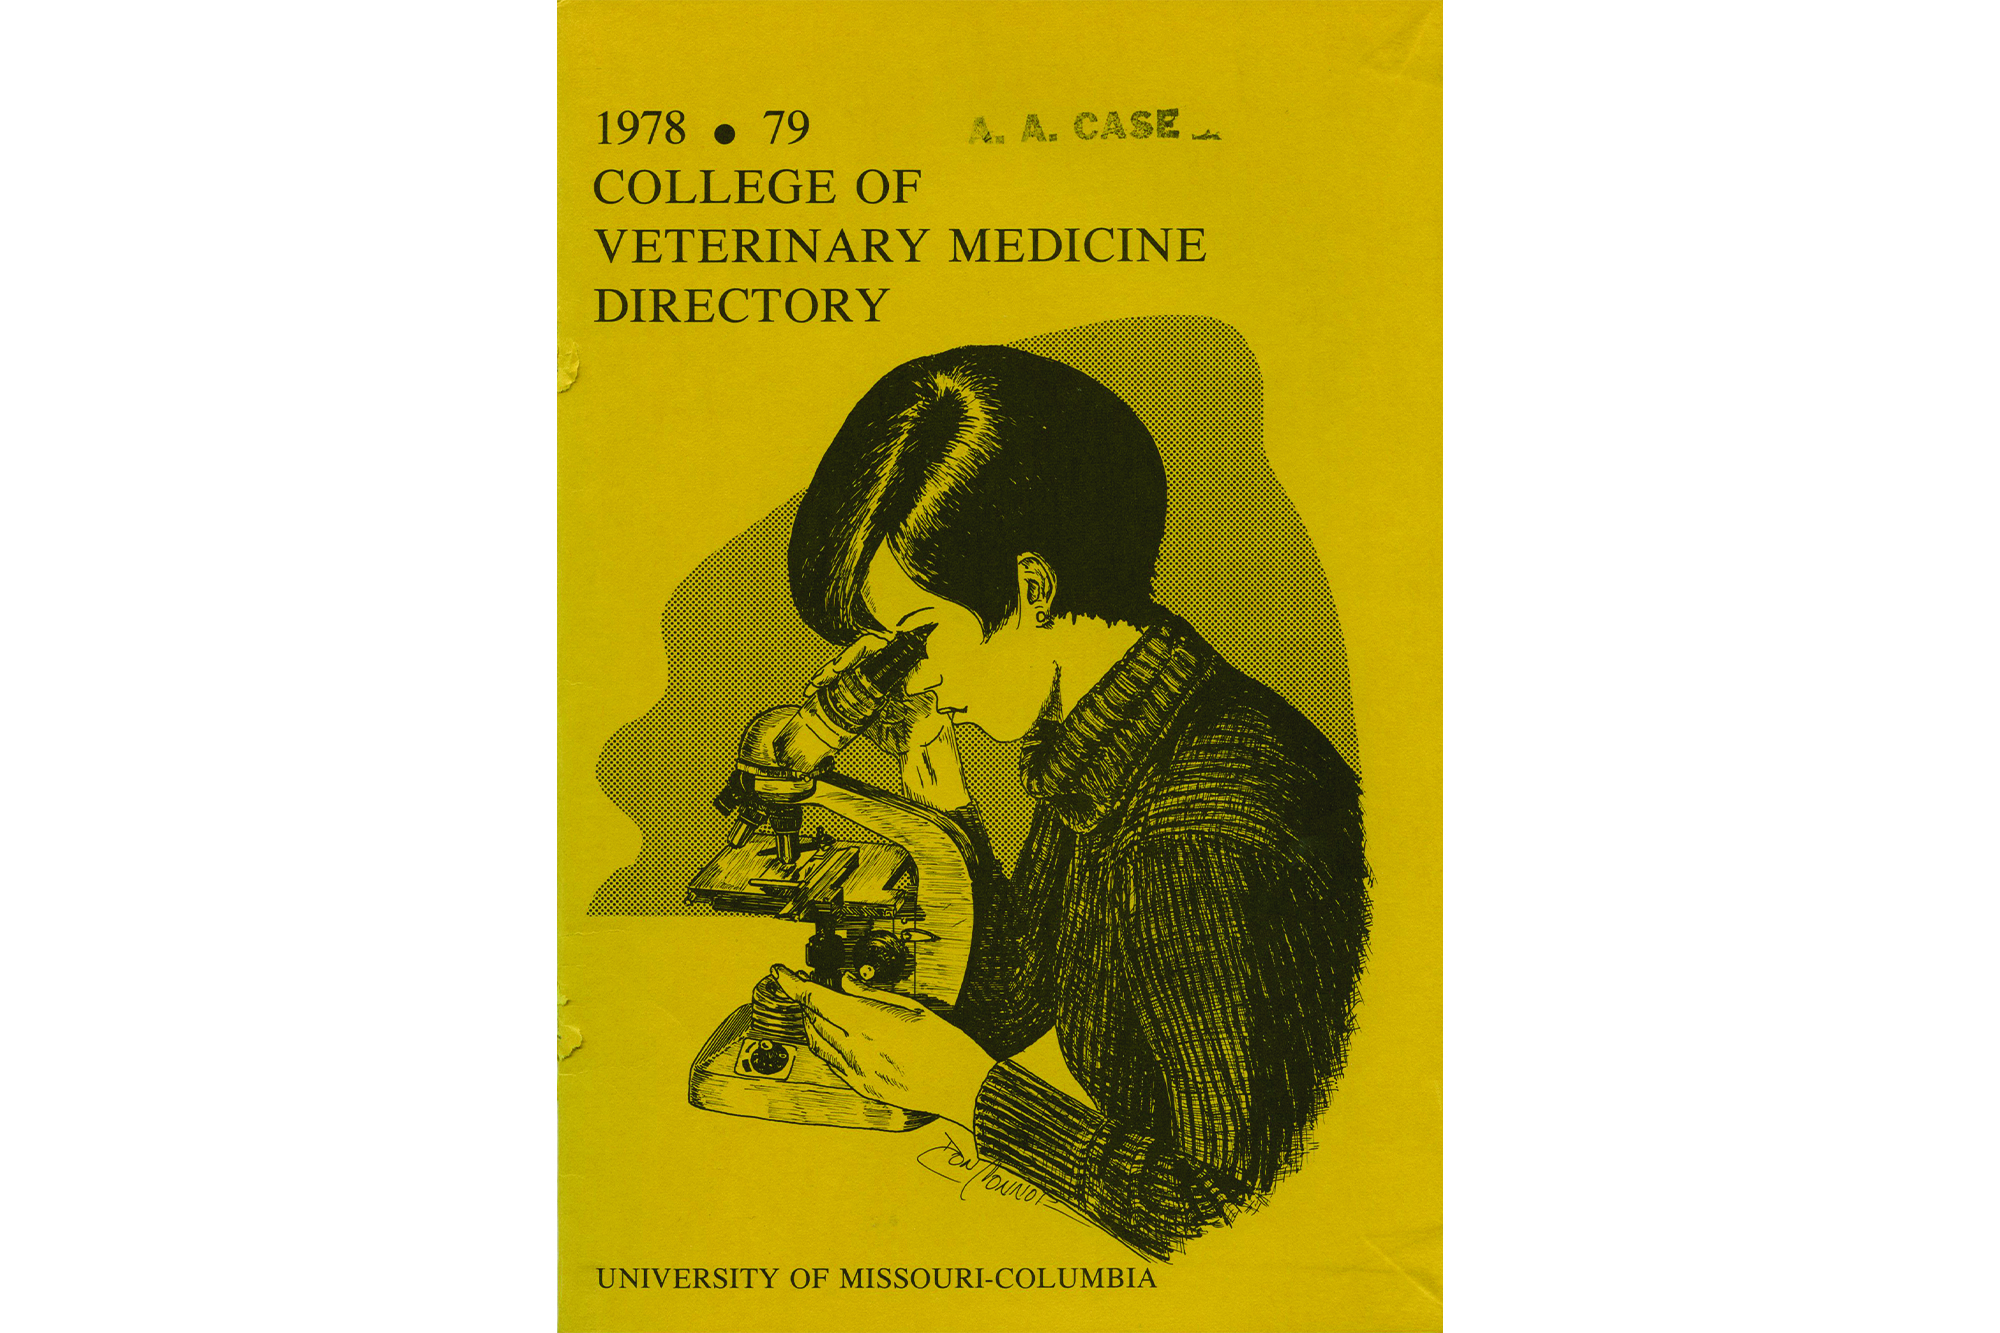 college of veterinary medicine directory from 1978/79. illustrated by don connor.